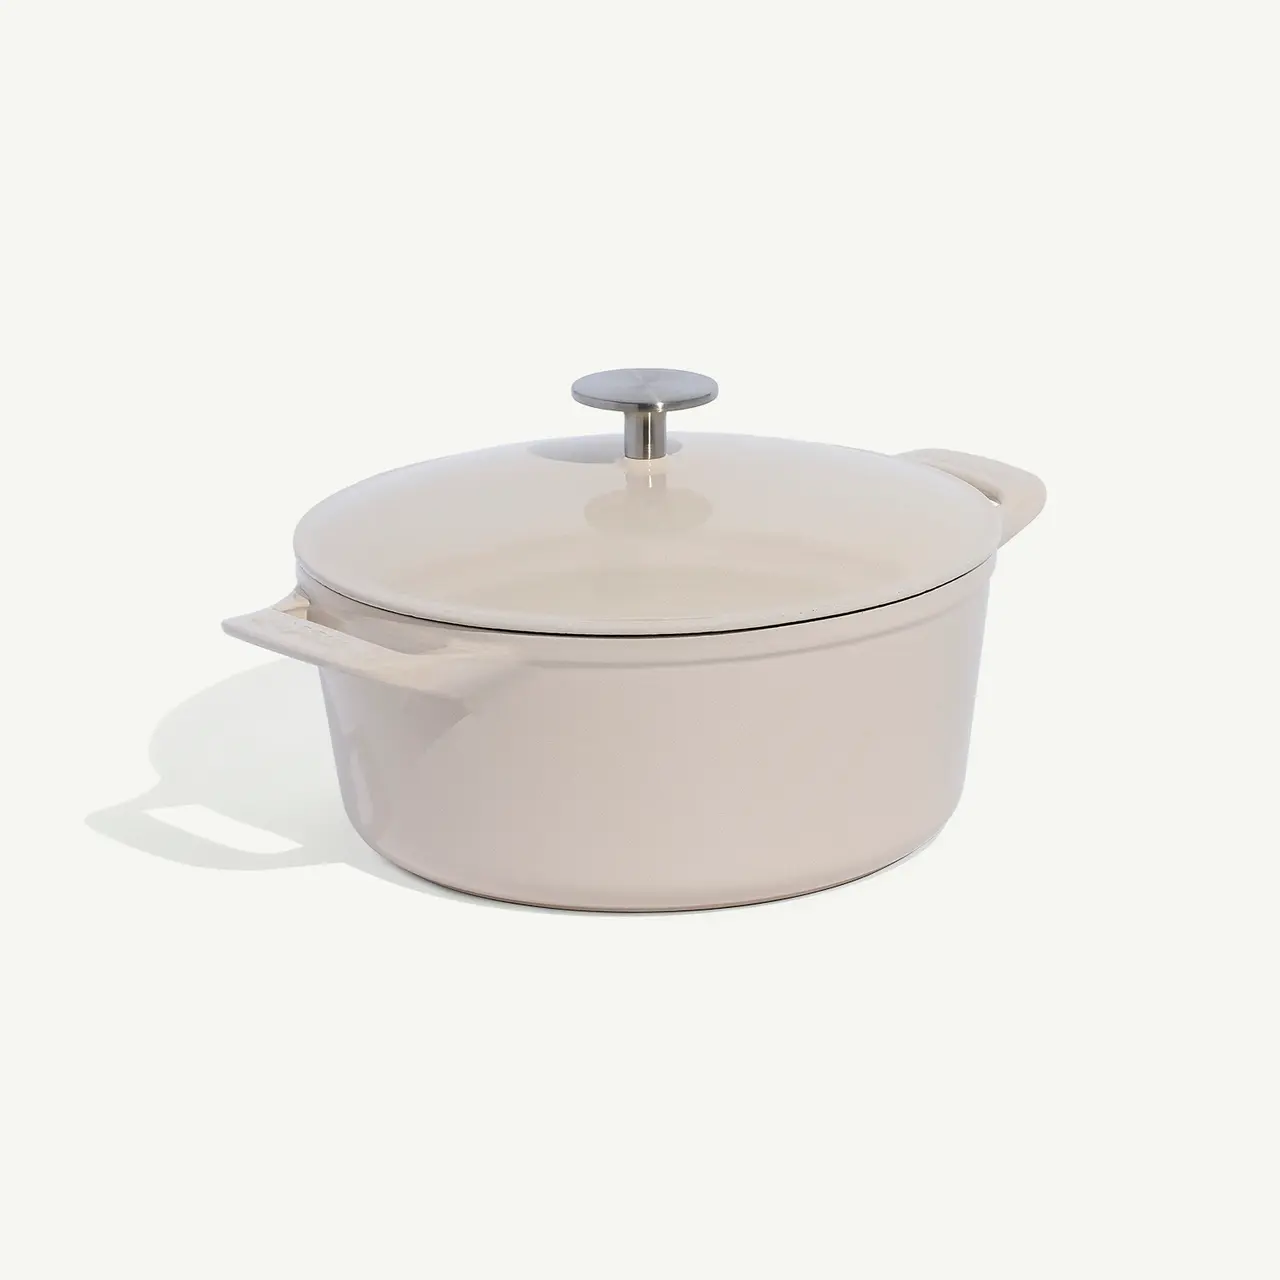 A white dutch oven pot with a lid on a plain background.